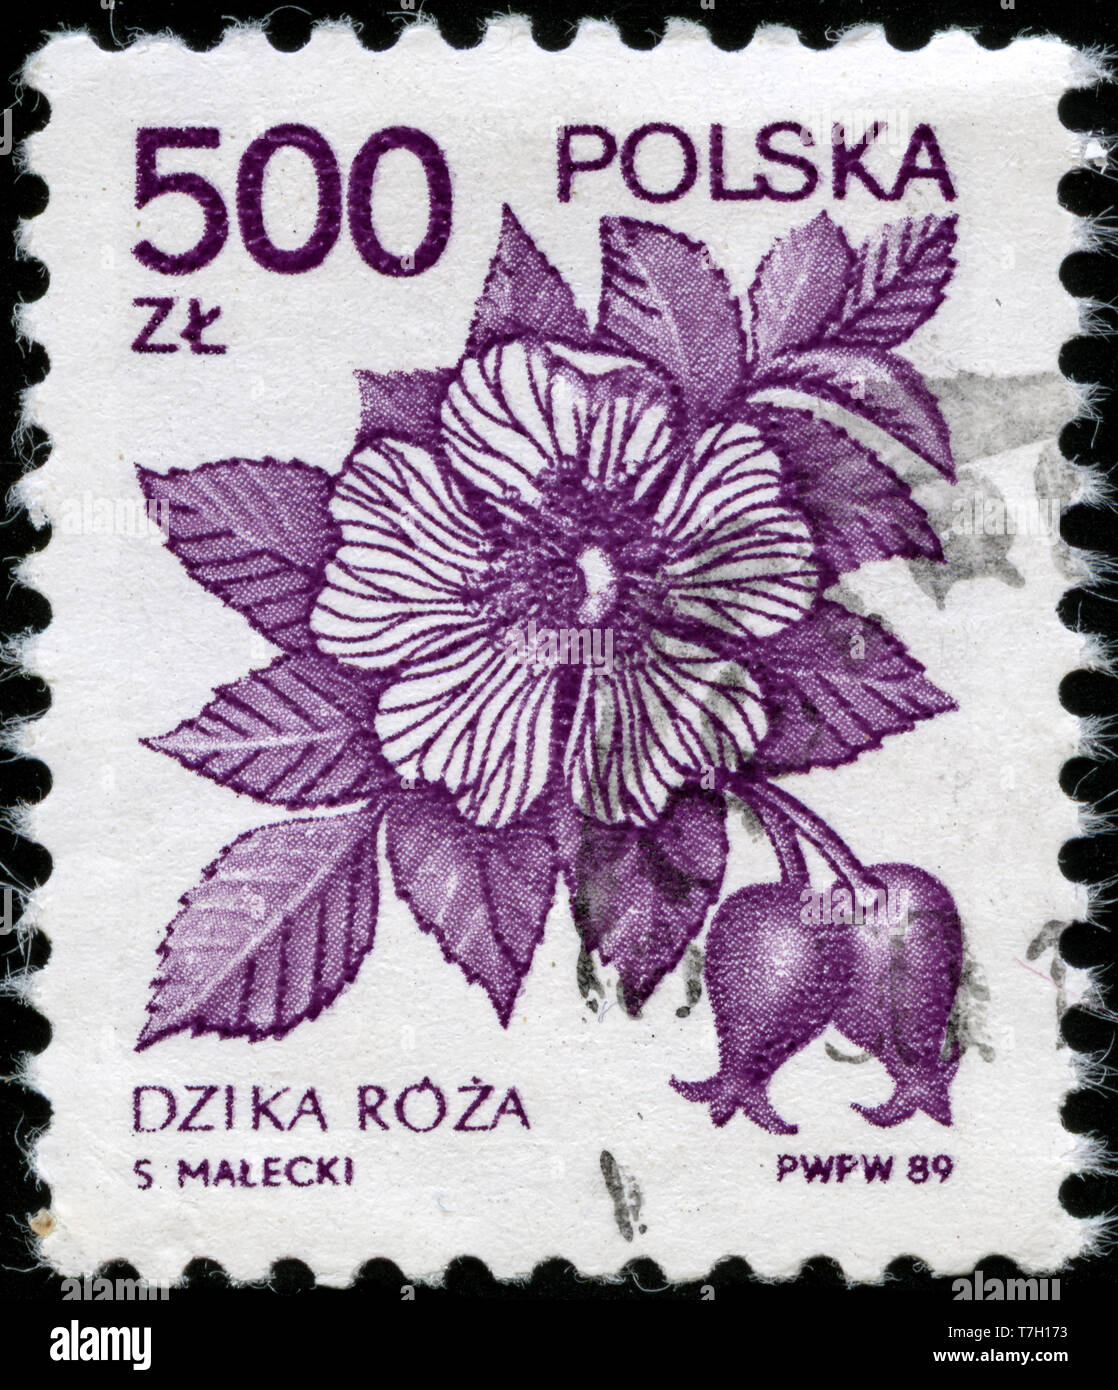 Postage stamp from Poland in the Medicinal Plants series issued in 1989 Stock Photo